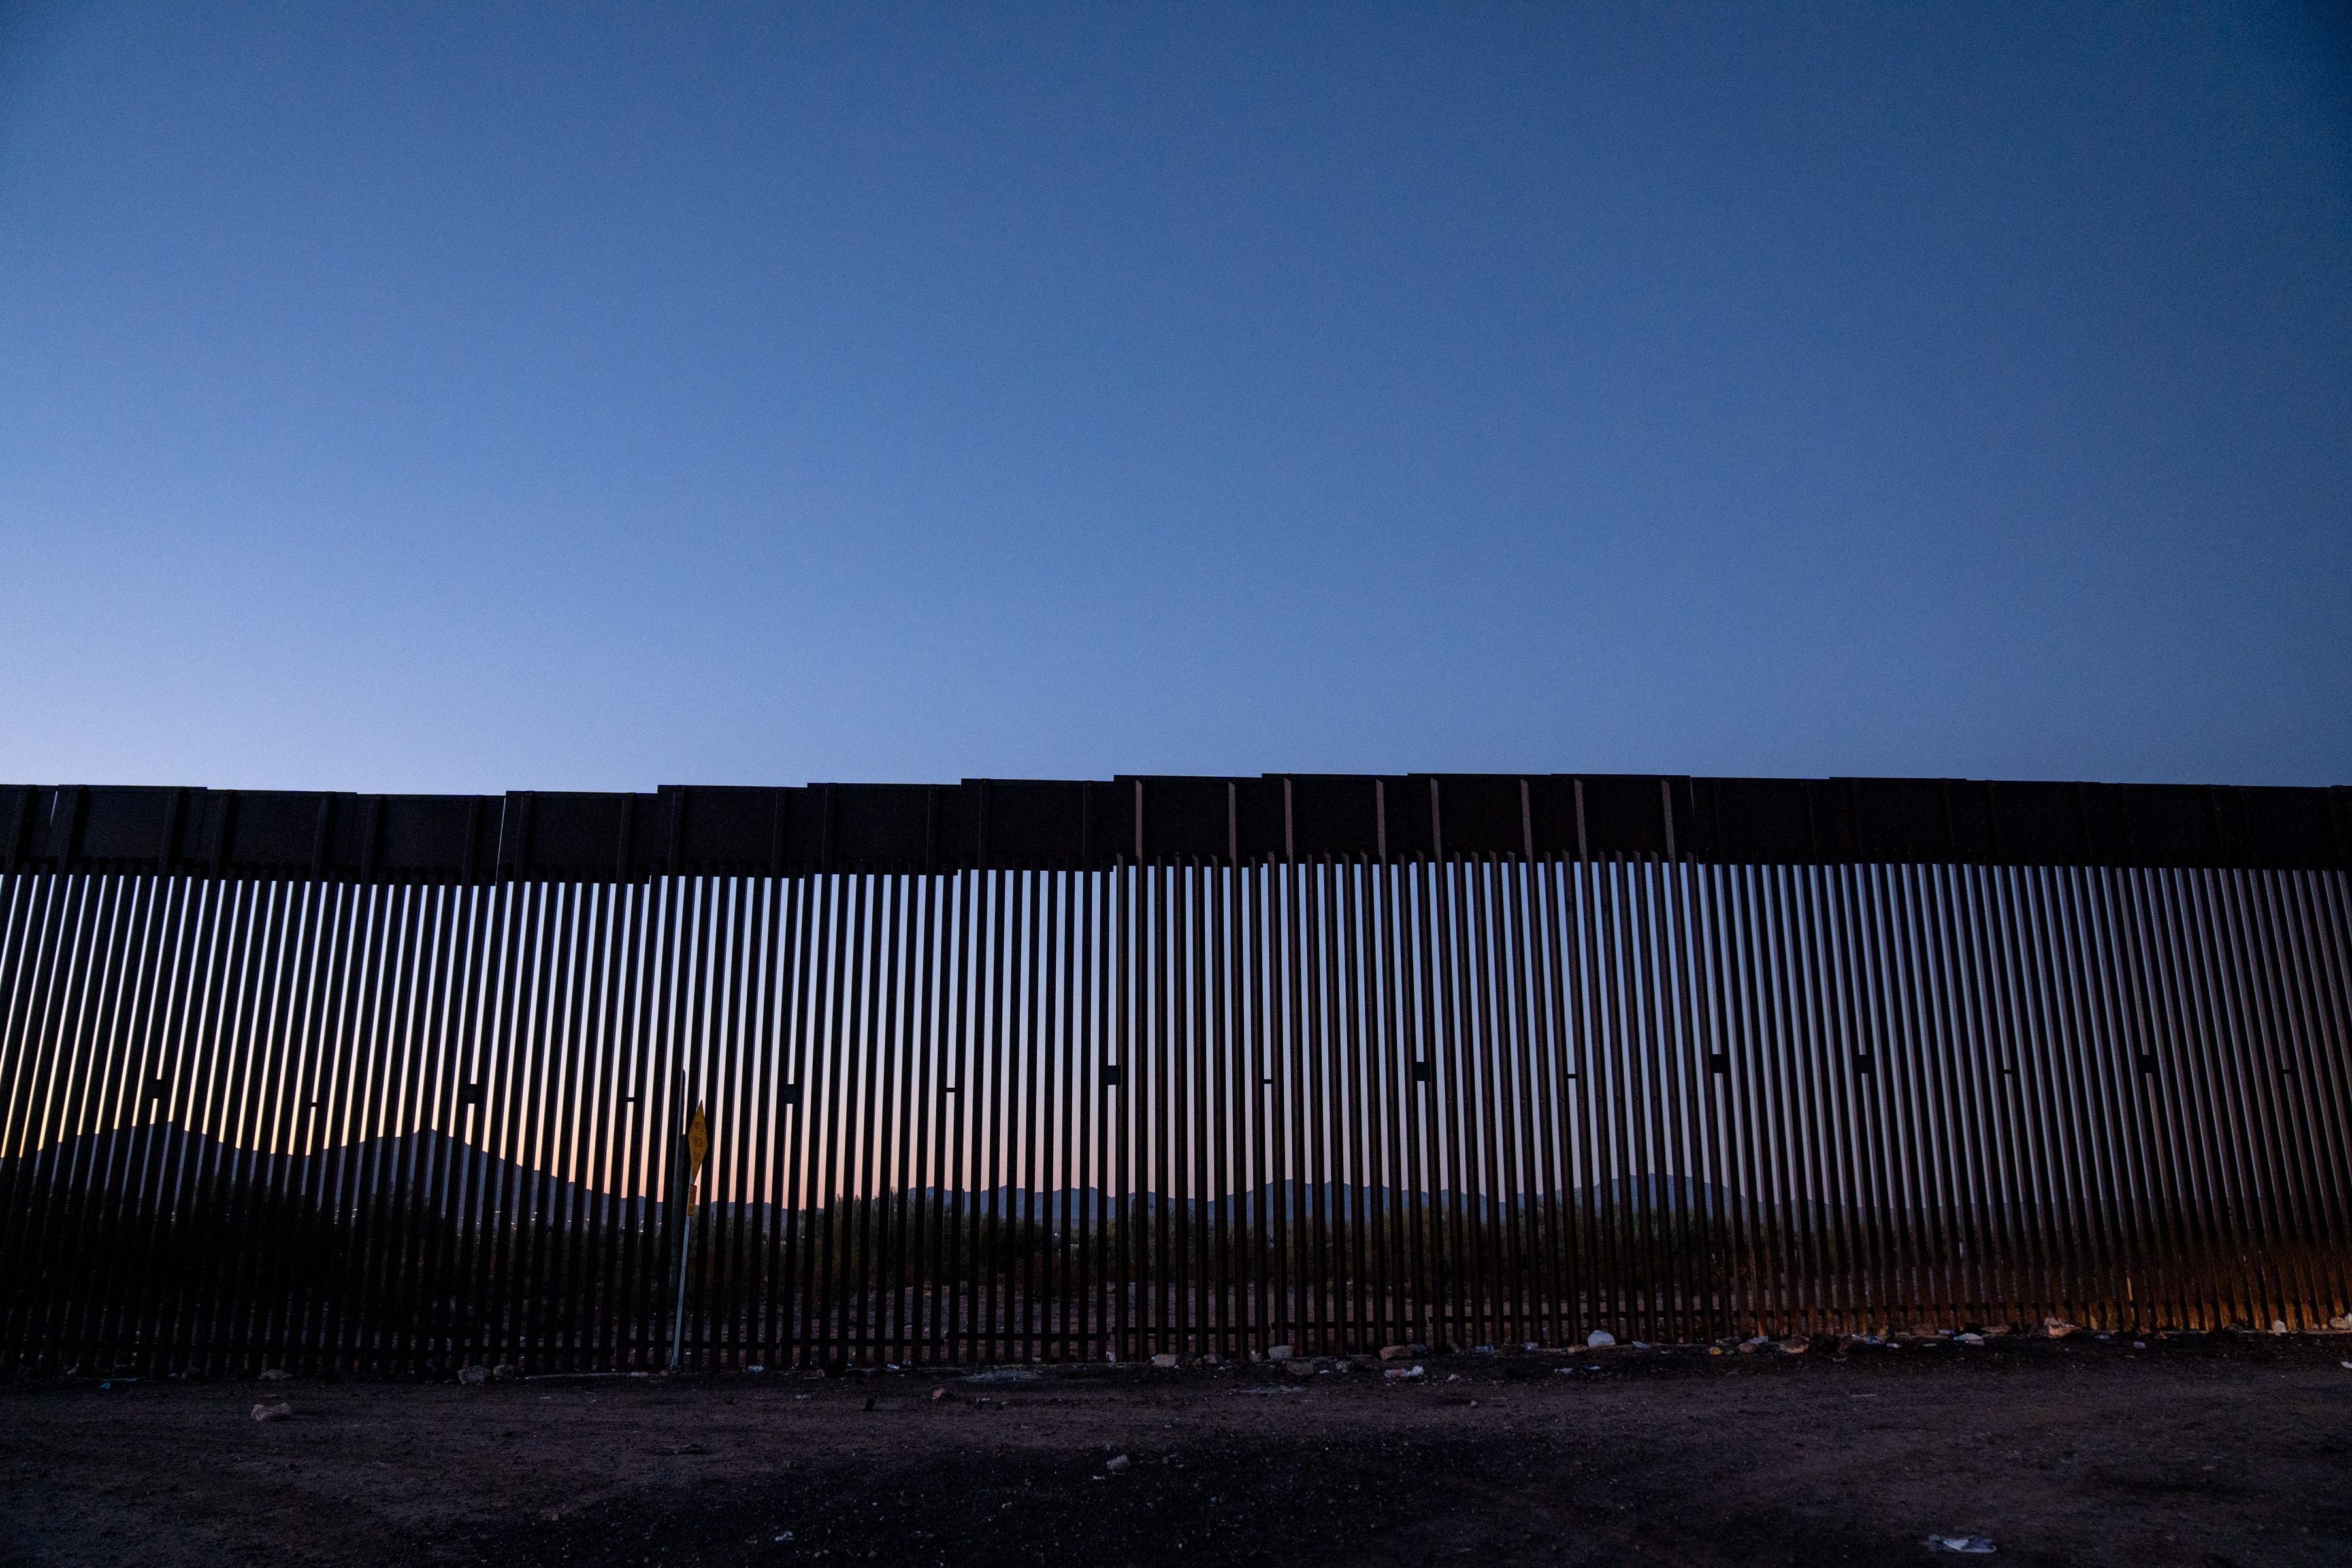 Cracking down on border security won't fix Arizona's immigration problems